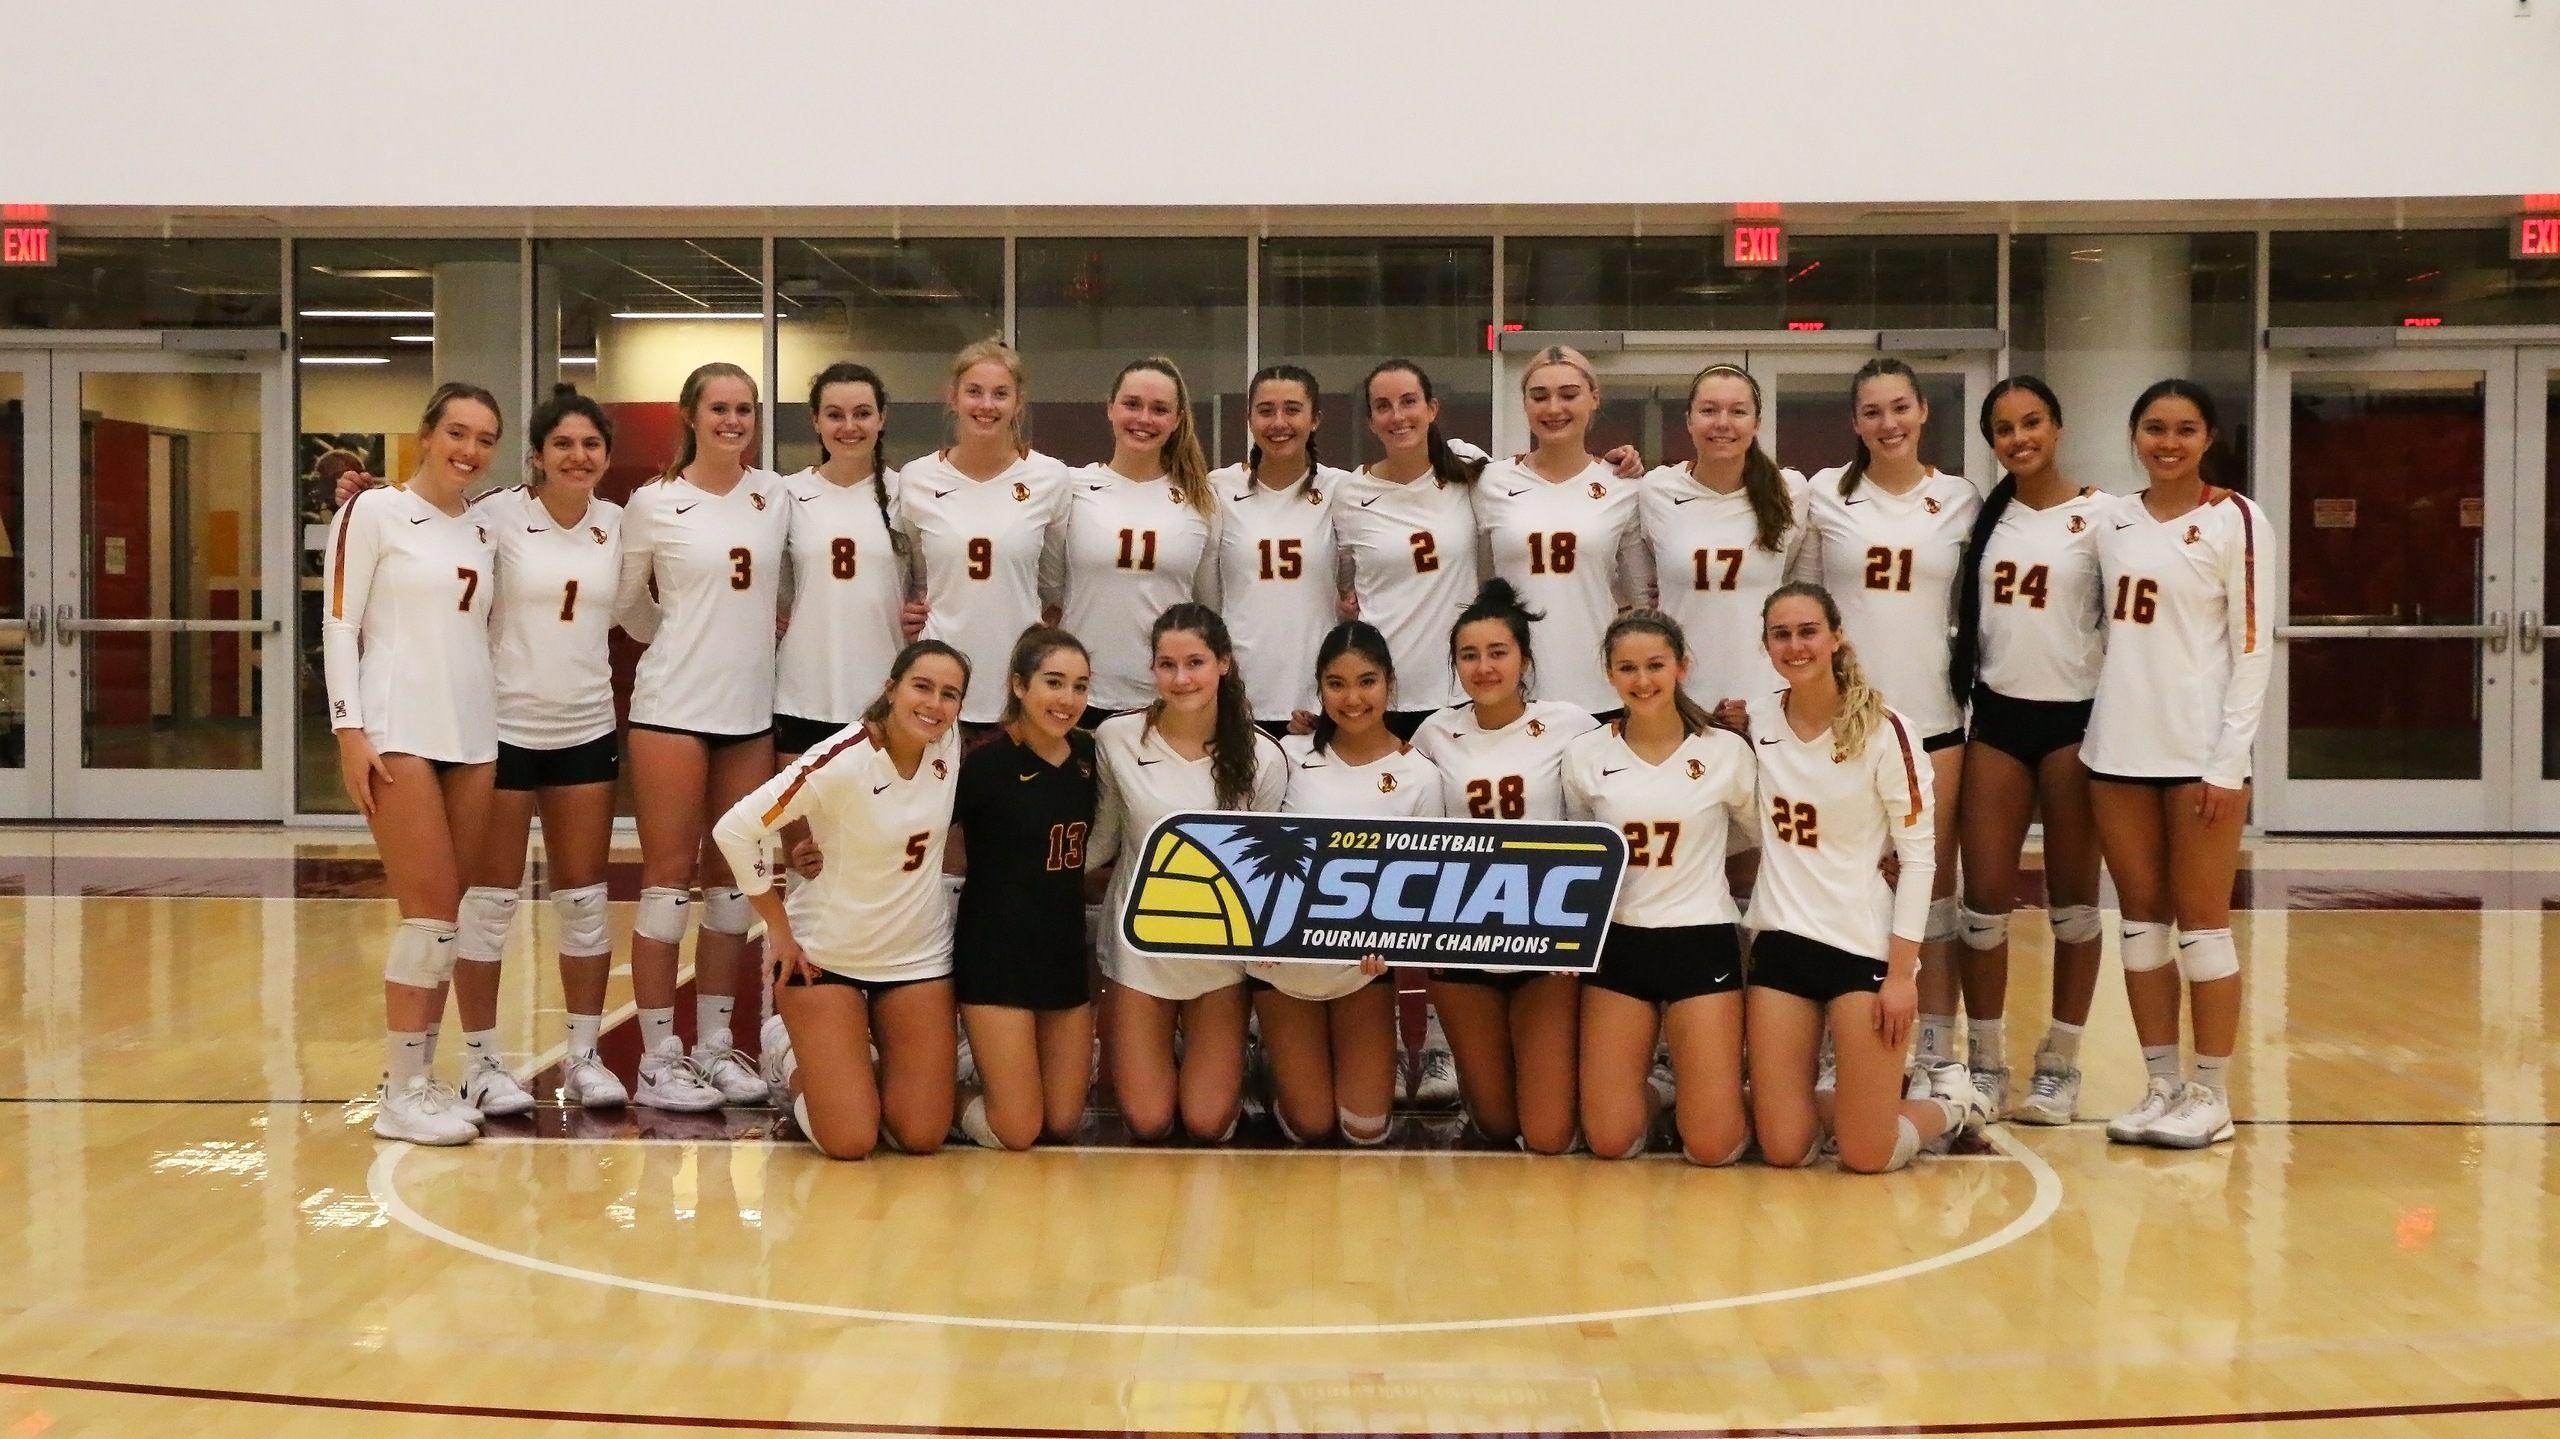 CMS earned its fifth SCIAC Championship in a row